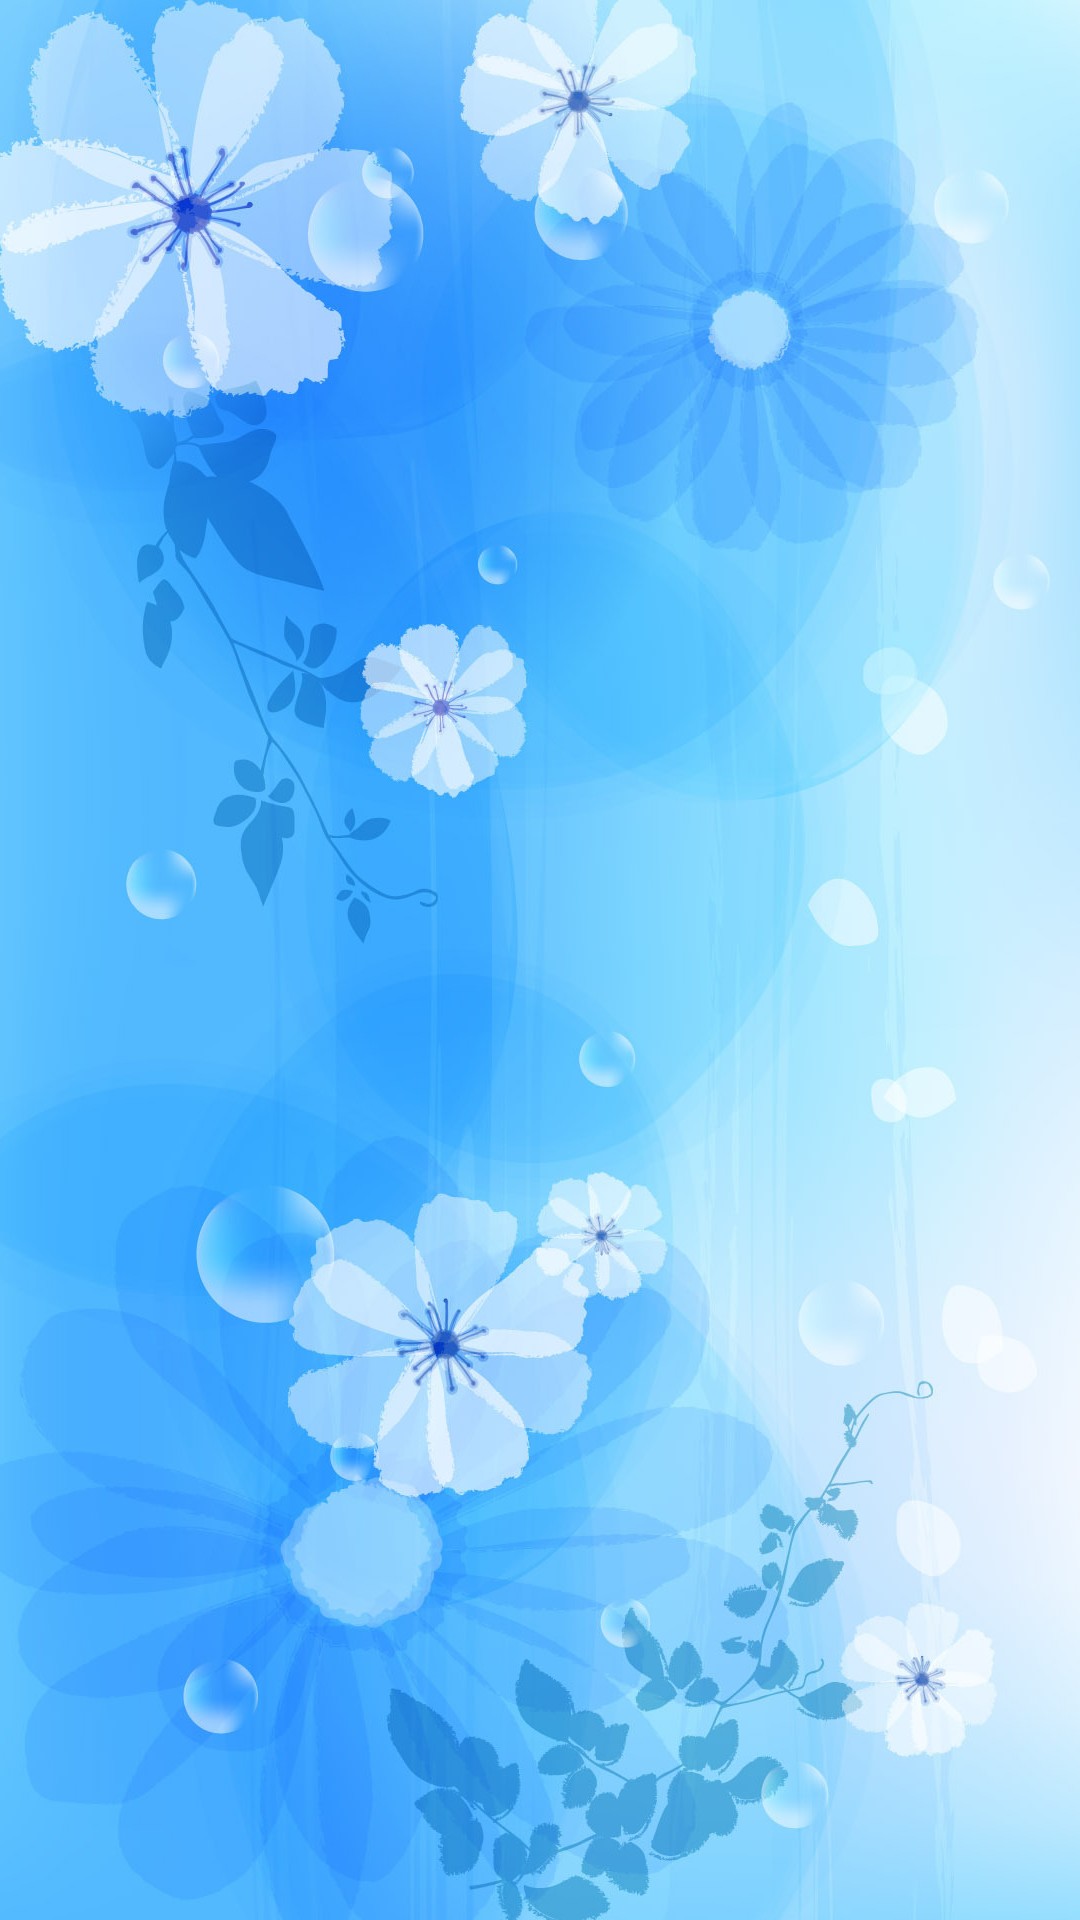 Girly Blue iPhone Wallpaper